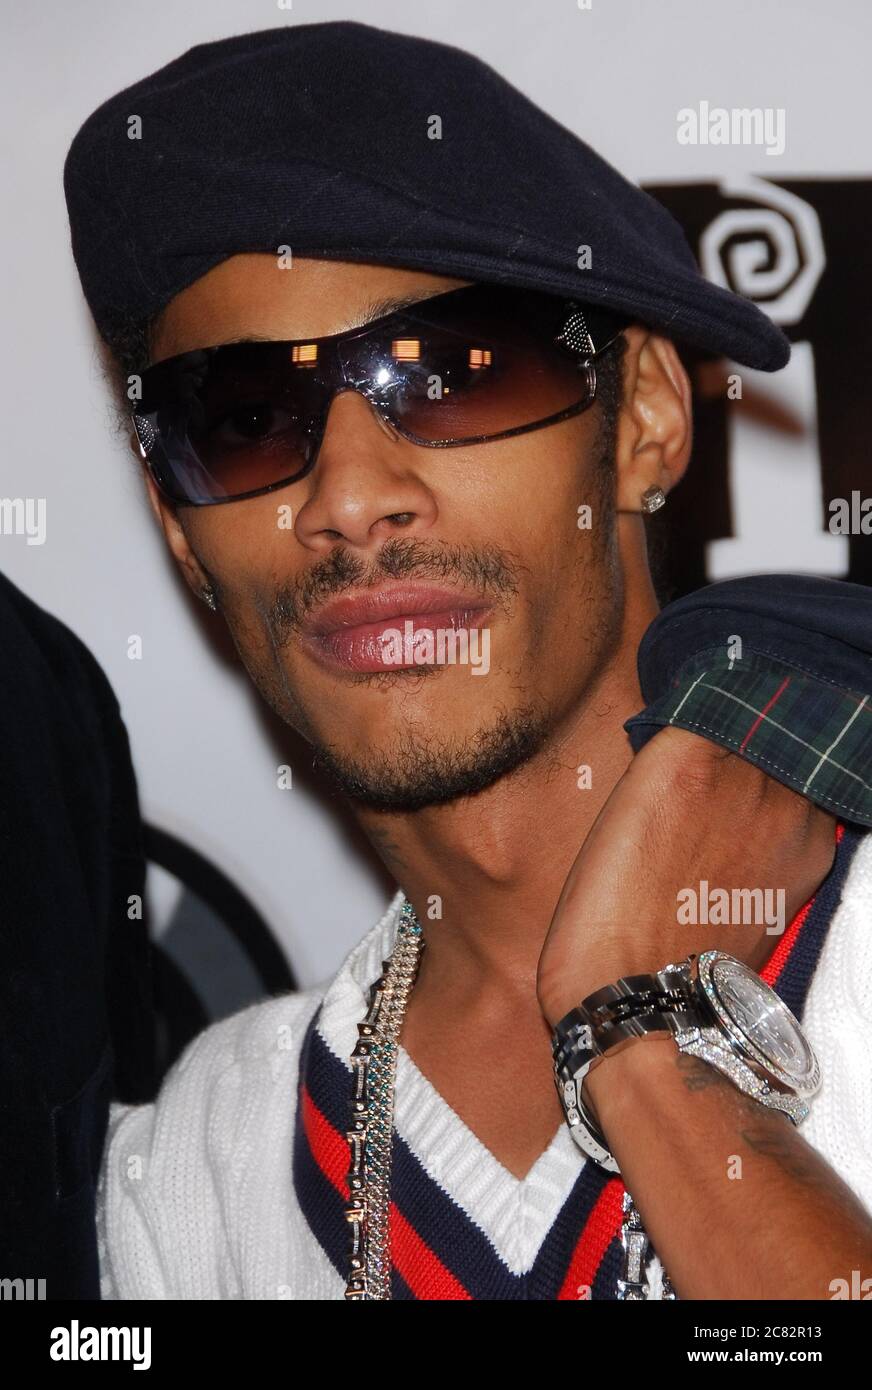 Layzie Bone of 'Bone Thugs N' Harmony' at Codeblack's Private Screening of 'I Tried' held at The Bridge: Cinema De Lux in Los Angeles, CA. The event took place on Monday, September 24, 2007. Photo by: SBM / PictureLux - File Reference # 34006-7891SBMPLX Stock Photo